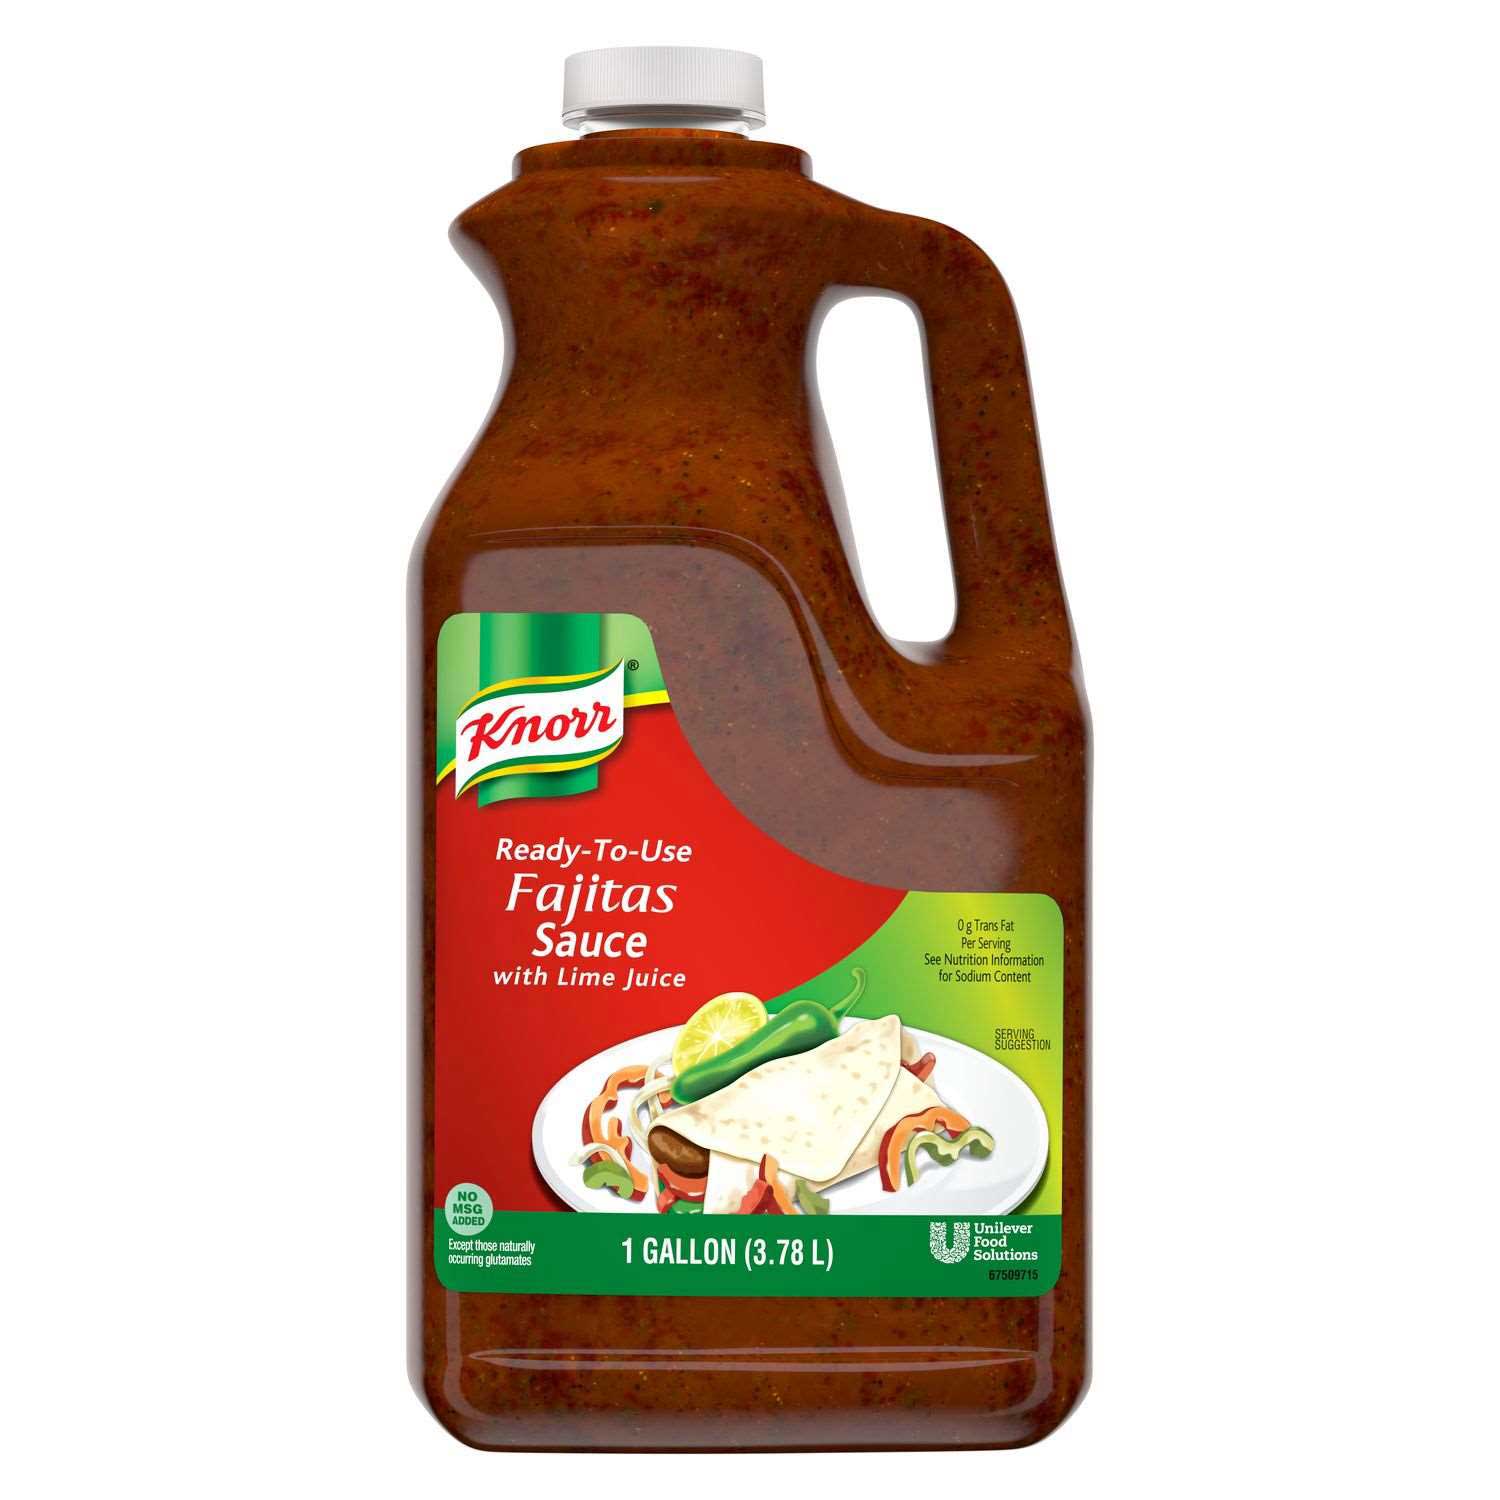 Knorr Professional Ready-to-Use Fajitas Sauce with Lime Juice Jug, 1 gallon -- 2 per case